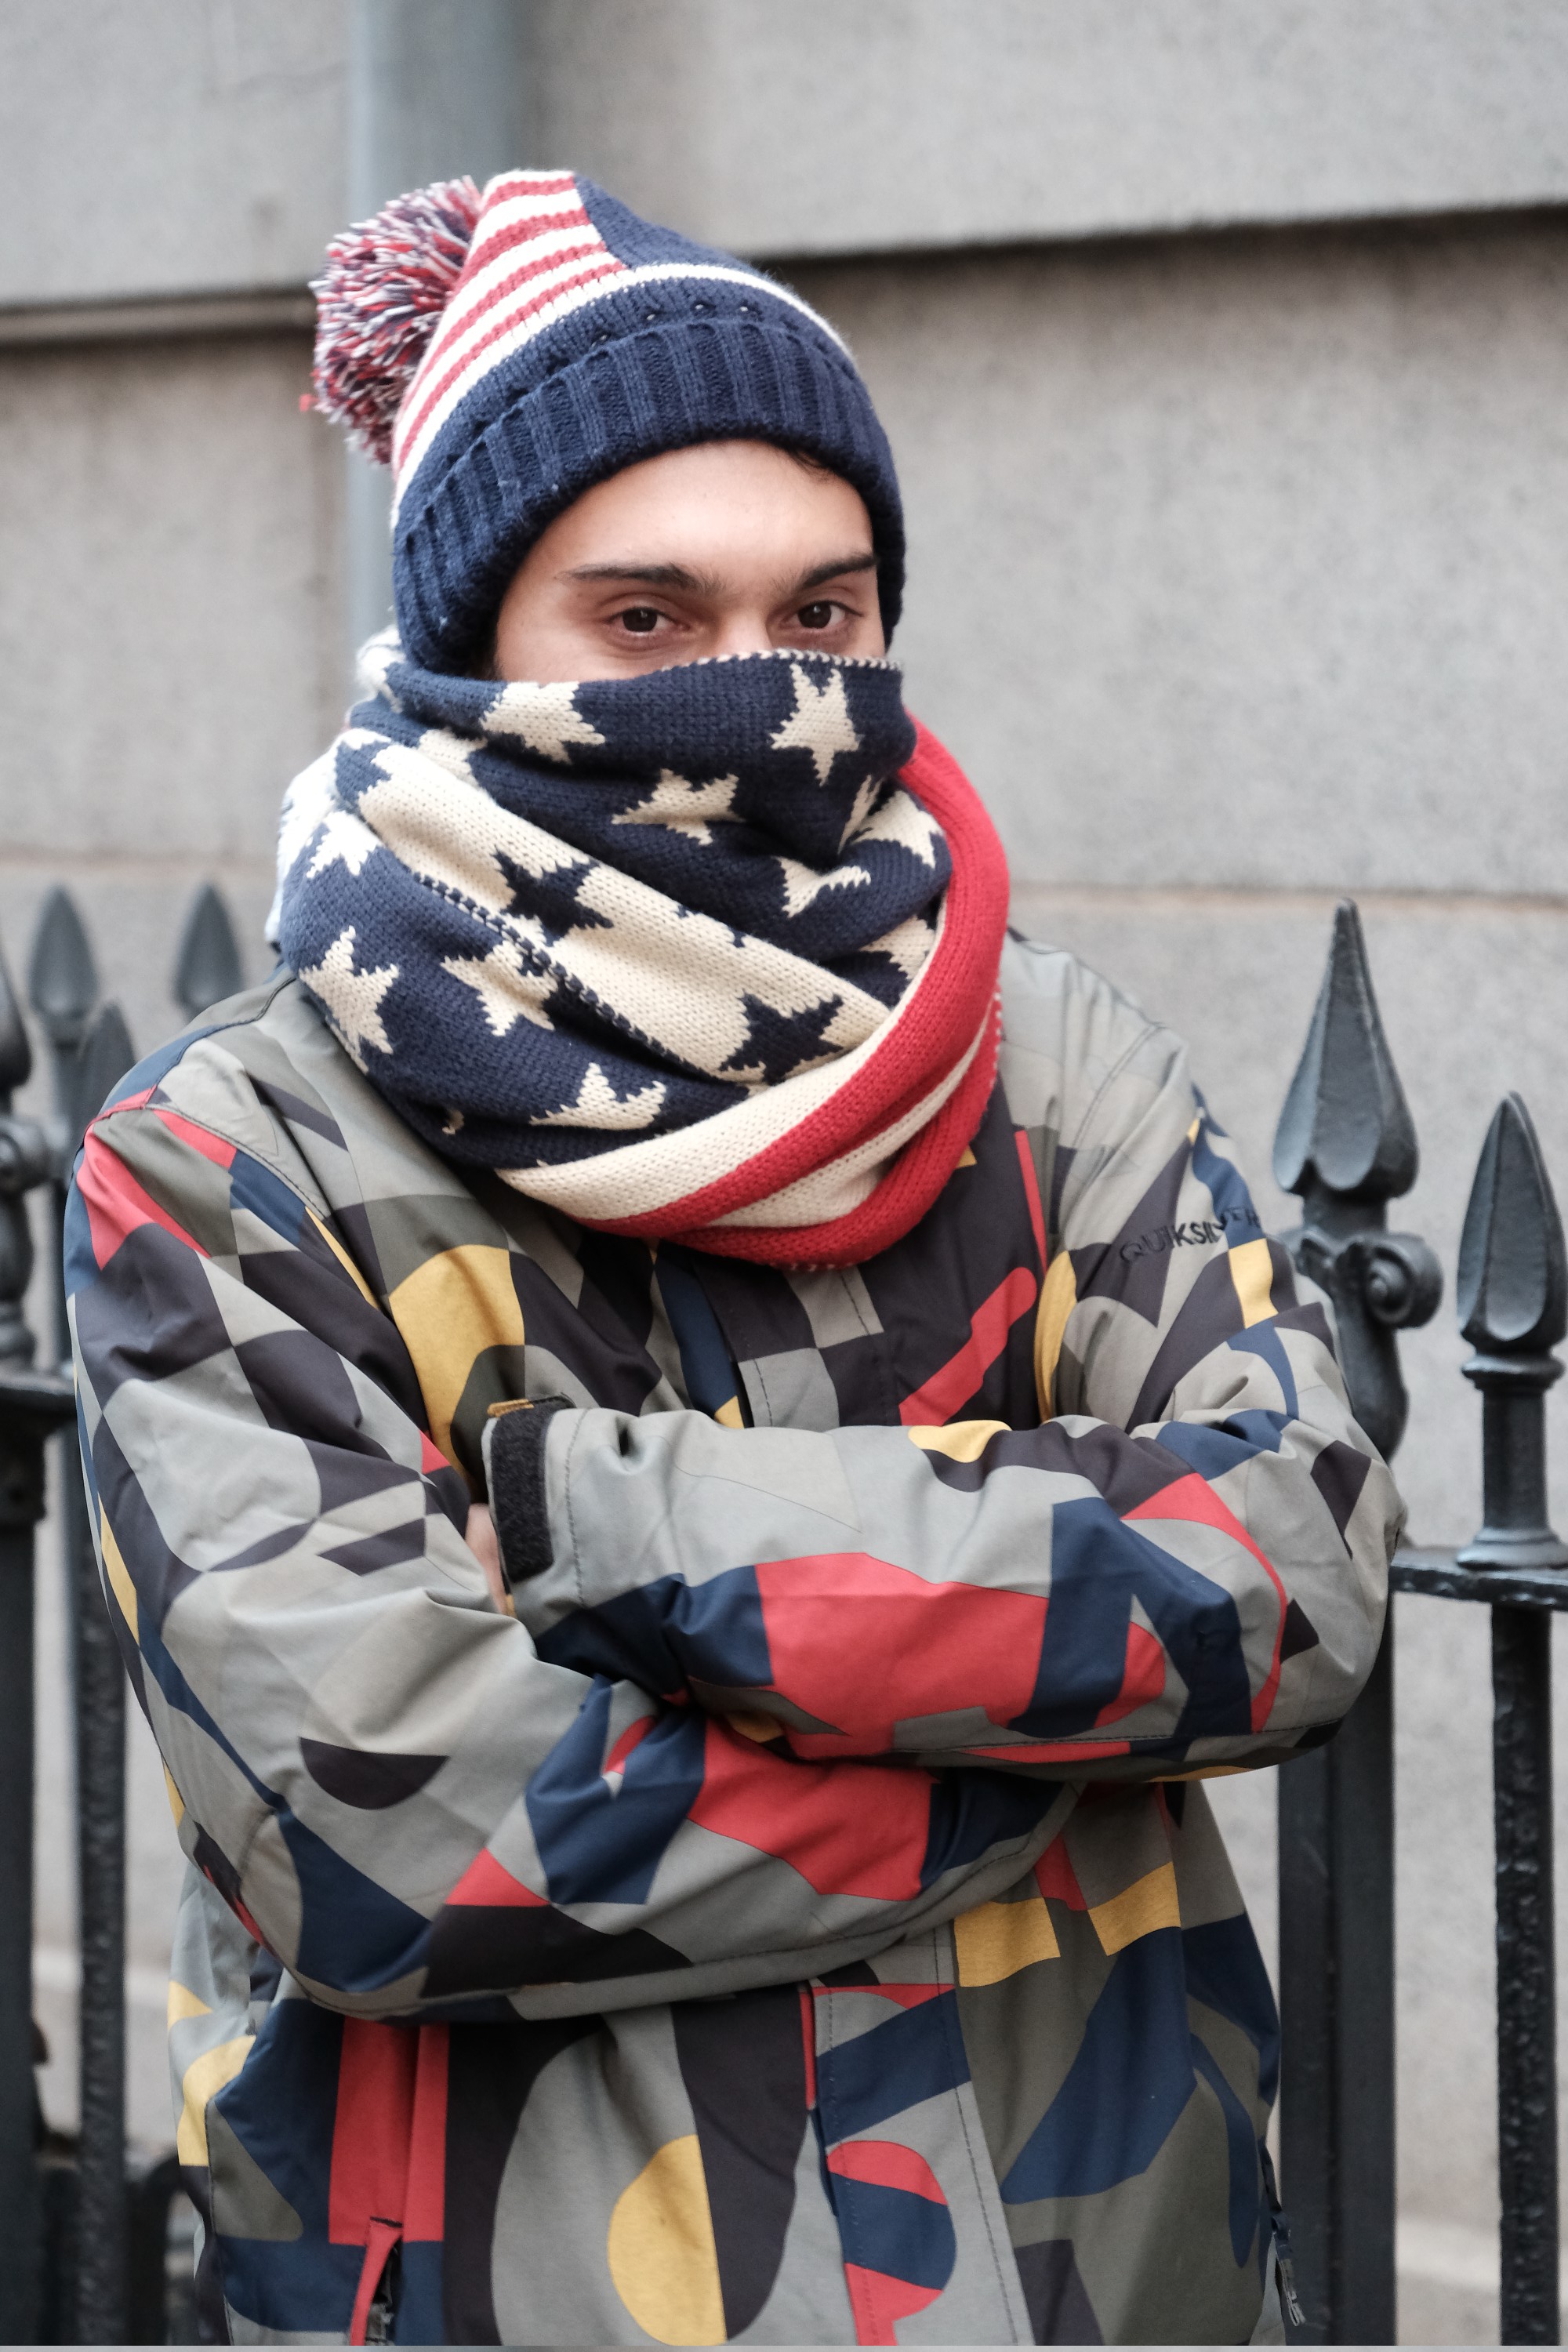 Protester wrapped in US flag